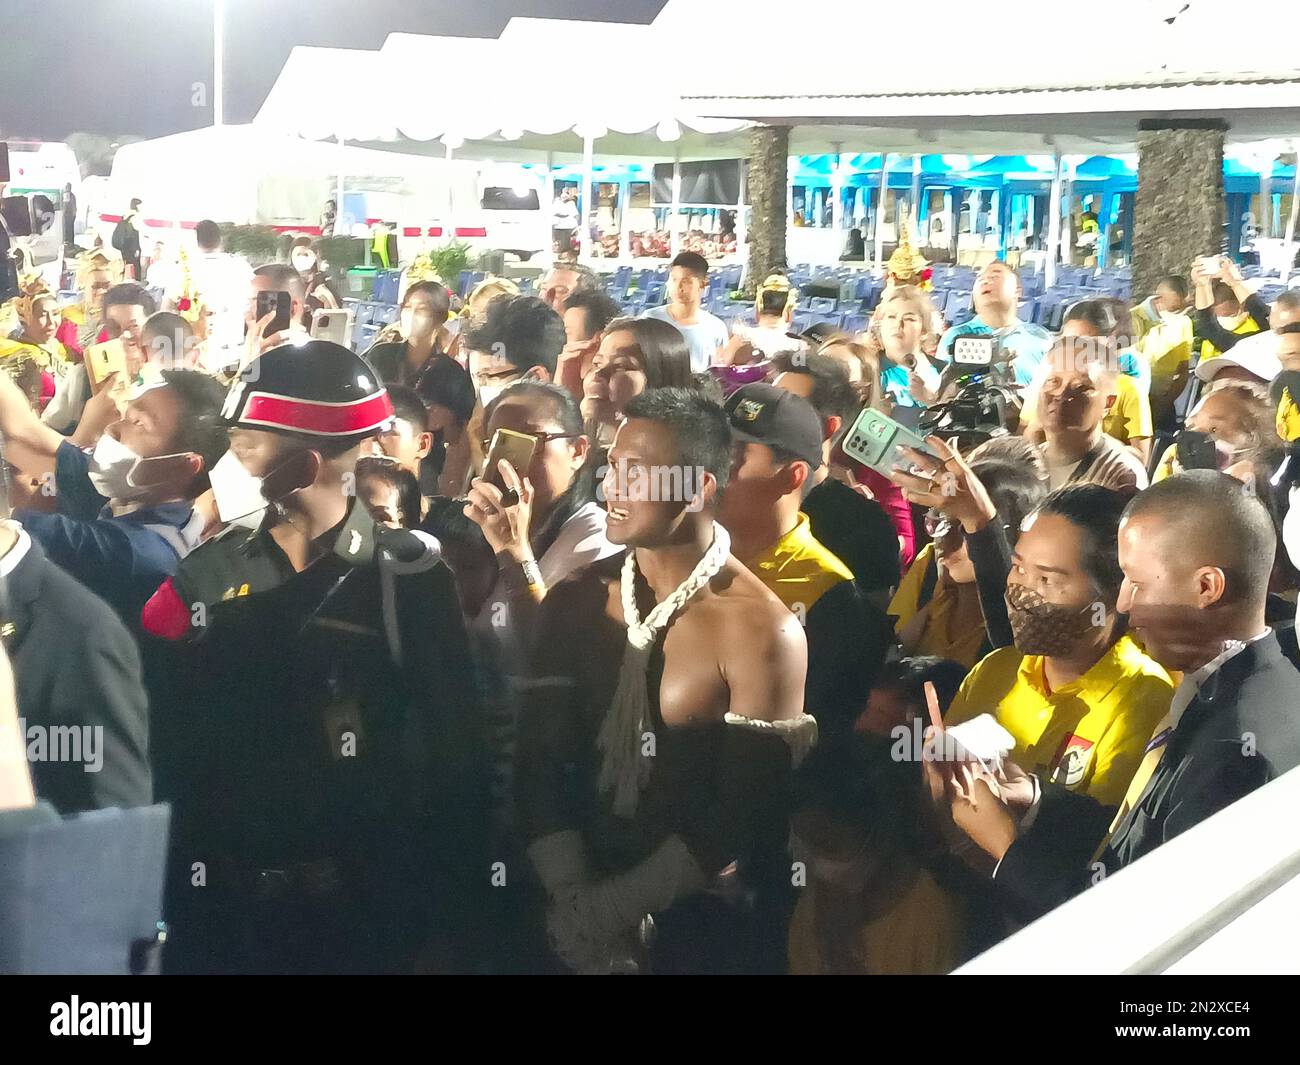 New Guinness World Record for greatest number of Muay Thai fighters gathered in one location, Ratchabhakti Park, Hua Hin, Thailand Stock Photo